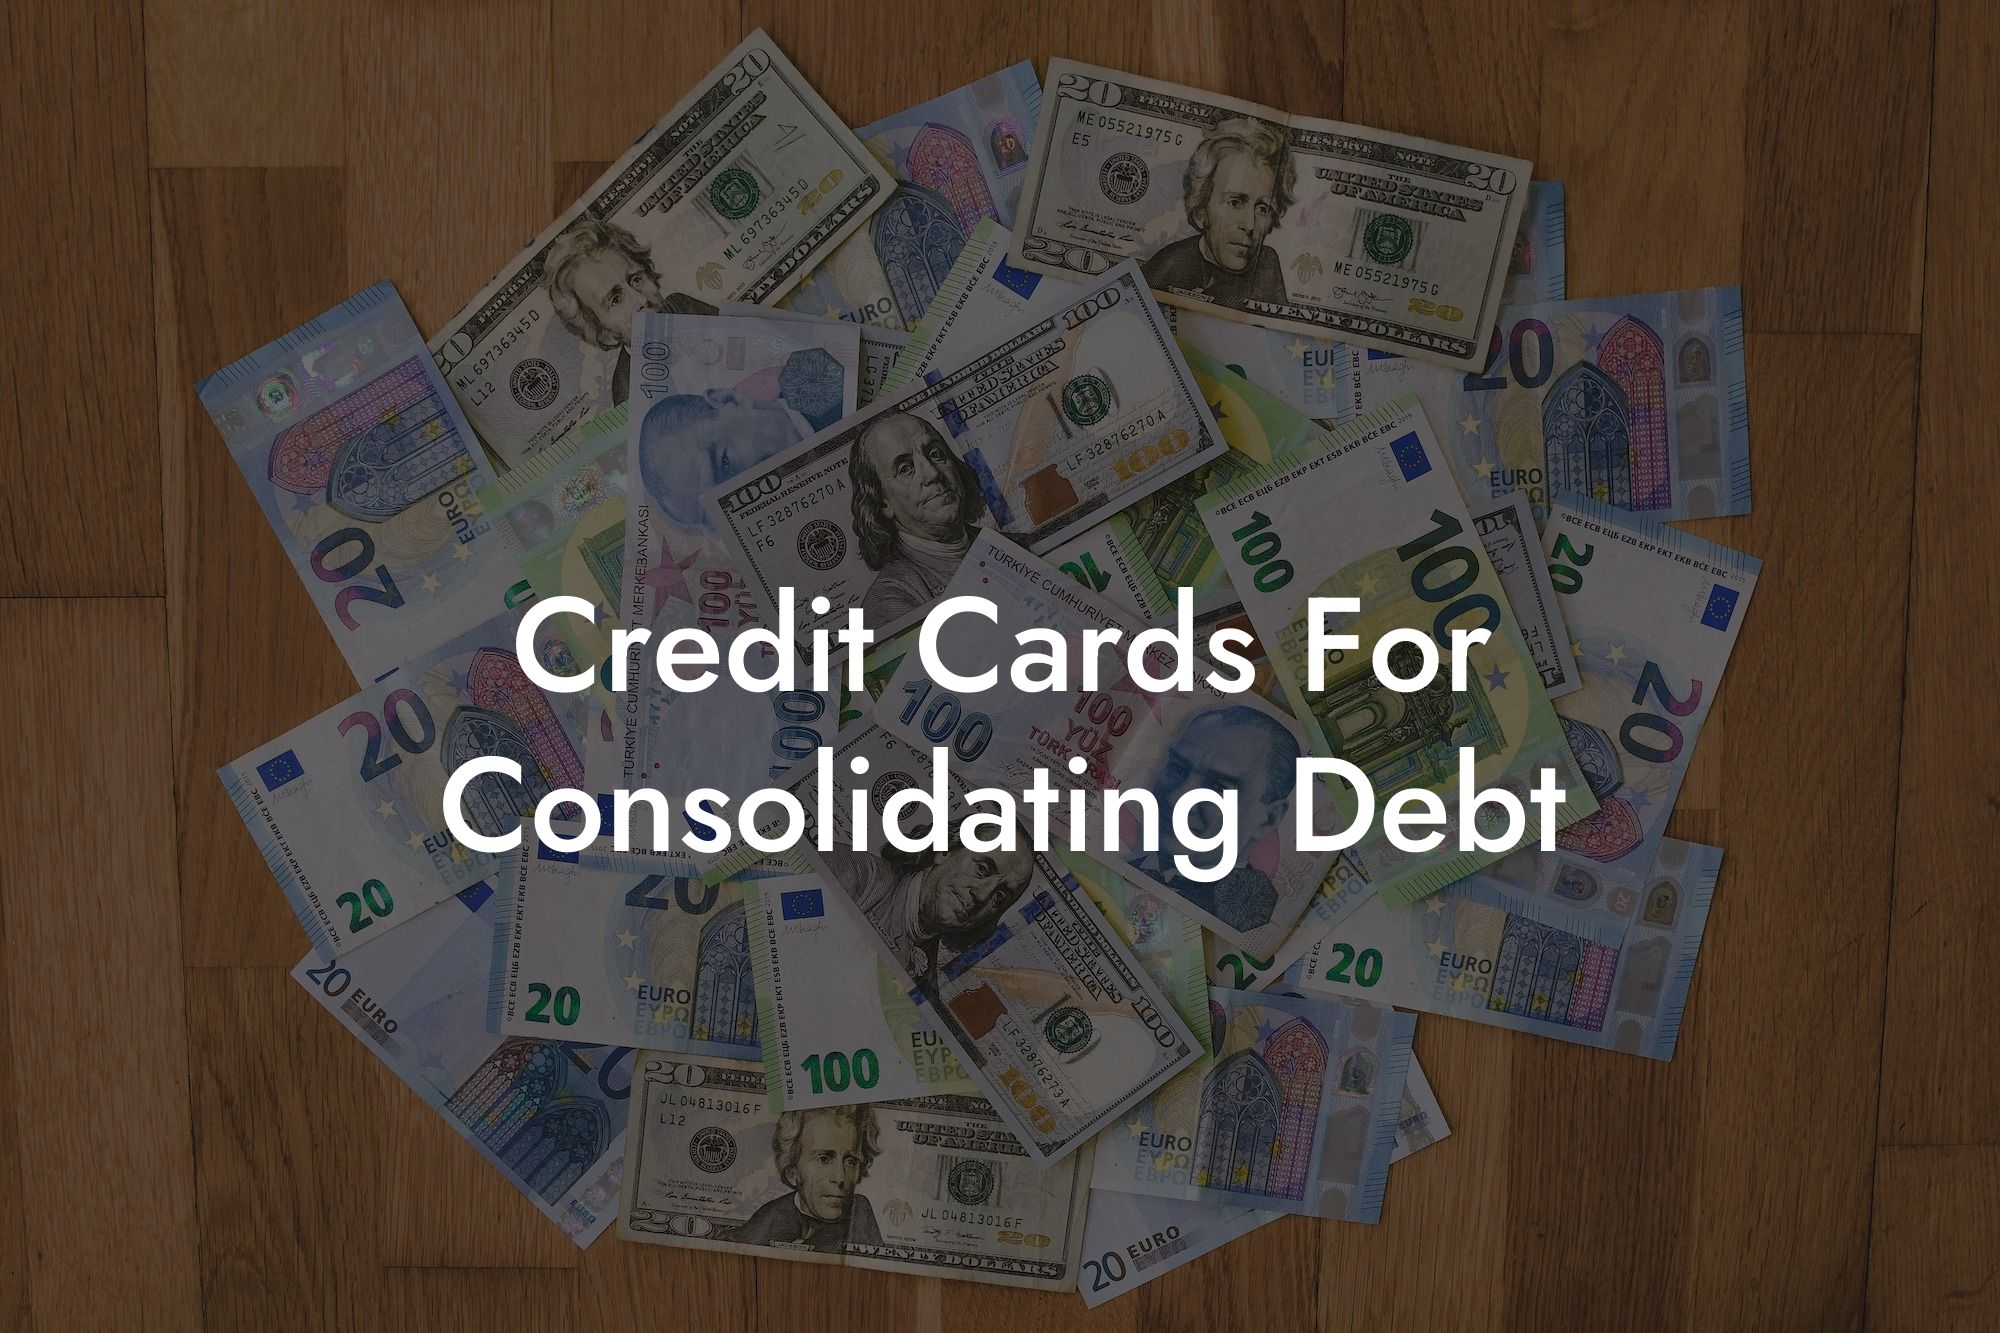 Credit Cards For Consolidating Debt